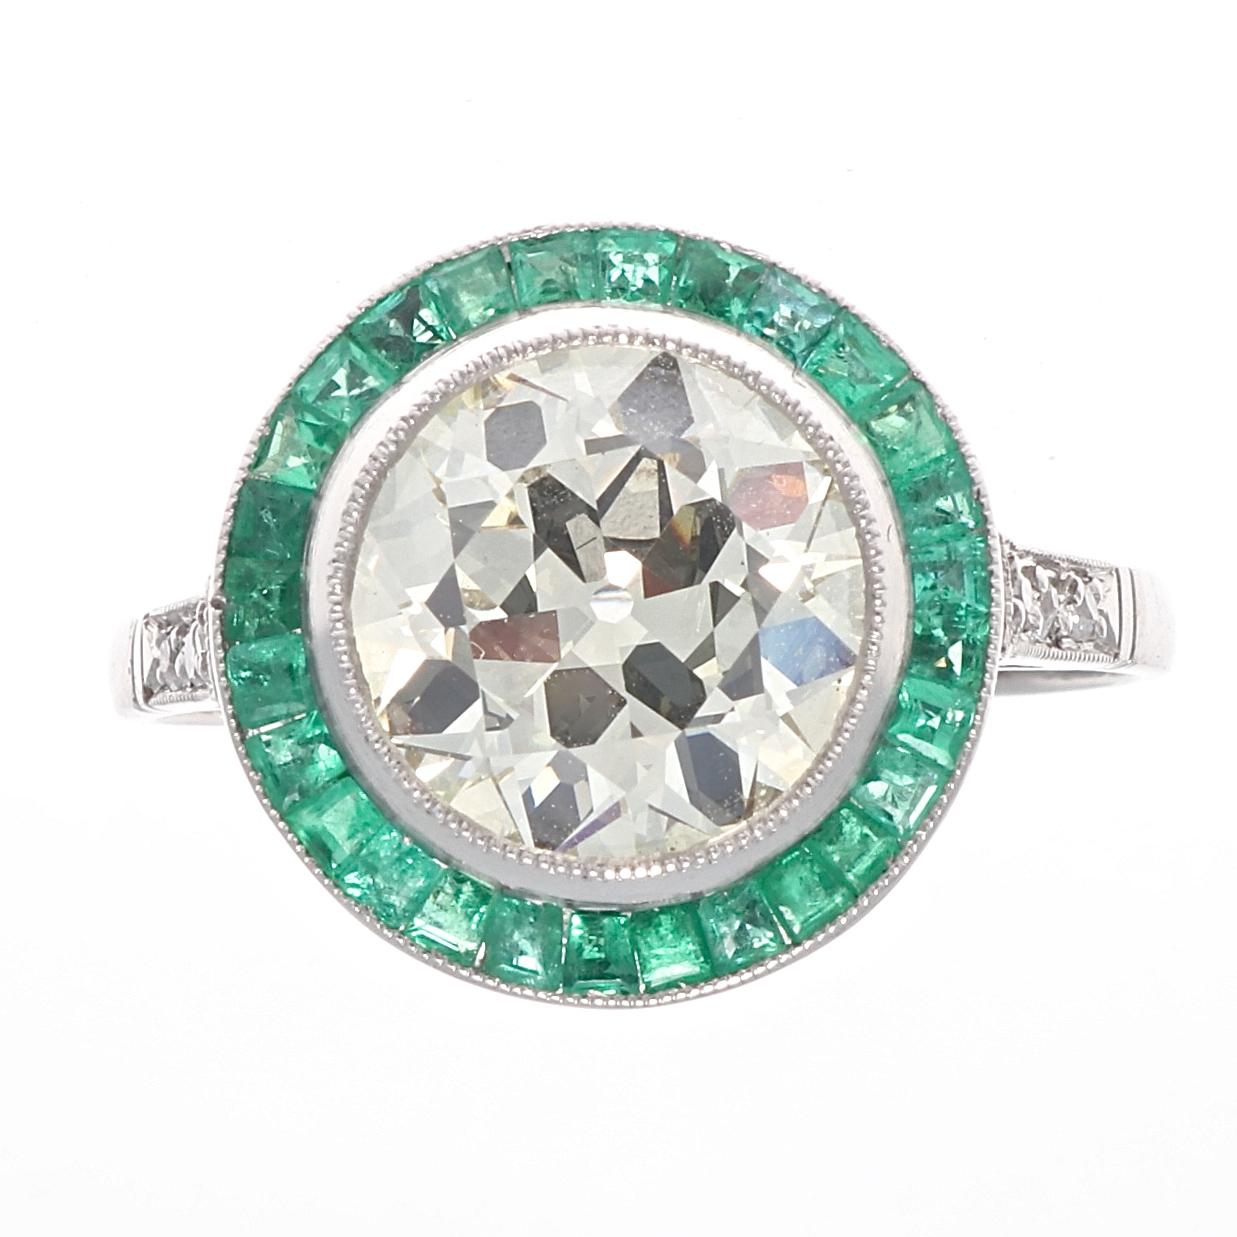 Everlasting beauty symbolizing eternal love through conventional design. Featuring an approximately 2.50 carat old European cut diamond that is  M color, VS clarity. Surrounded by a ring of glowing green emeralds. Crafted in platinum. Ring size 7